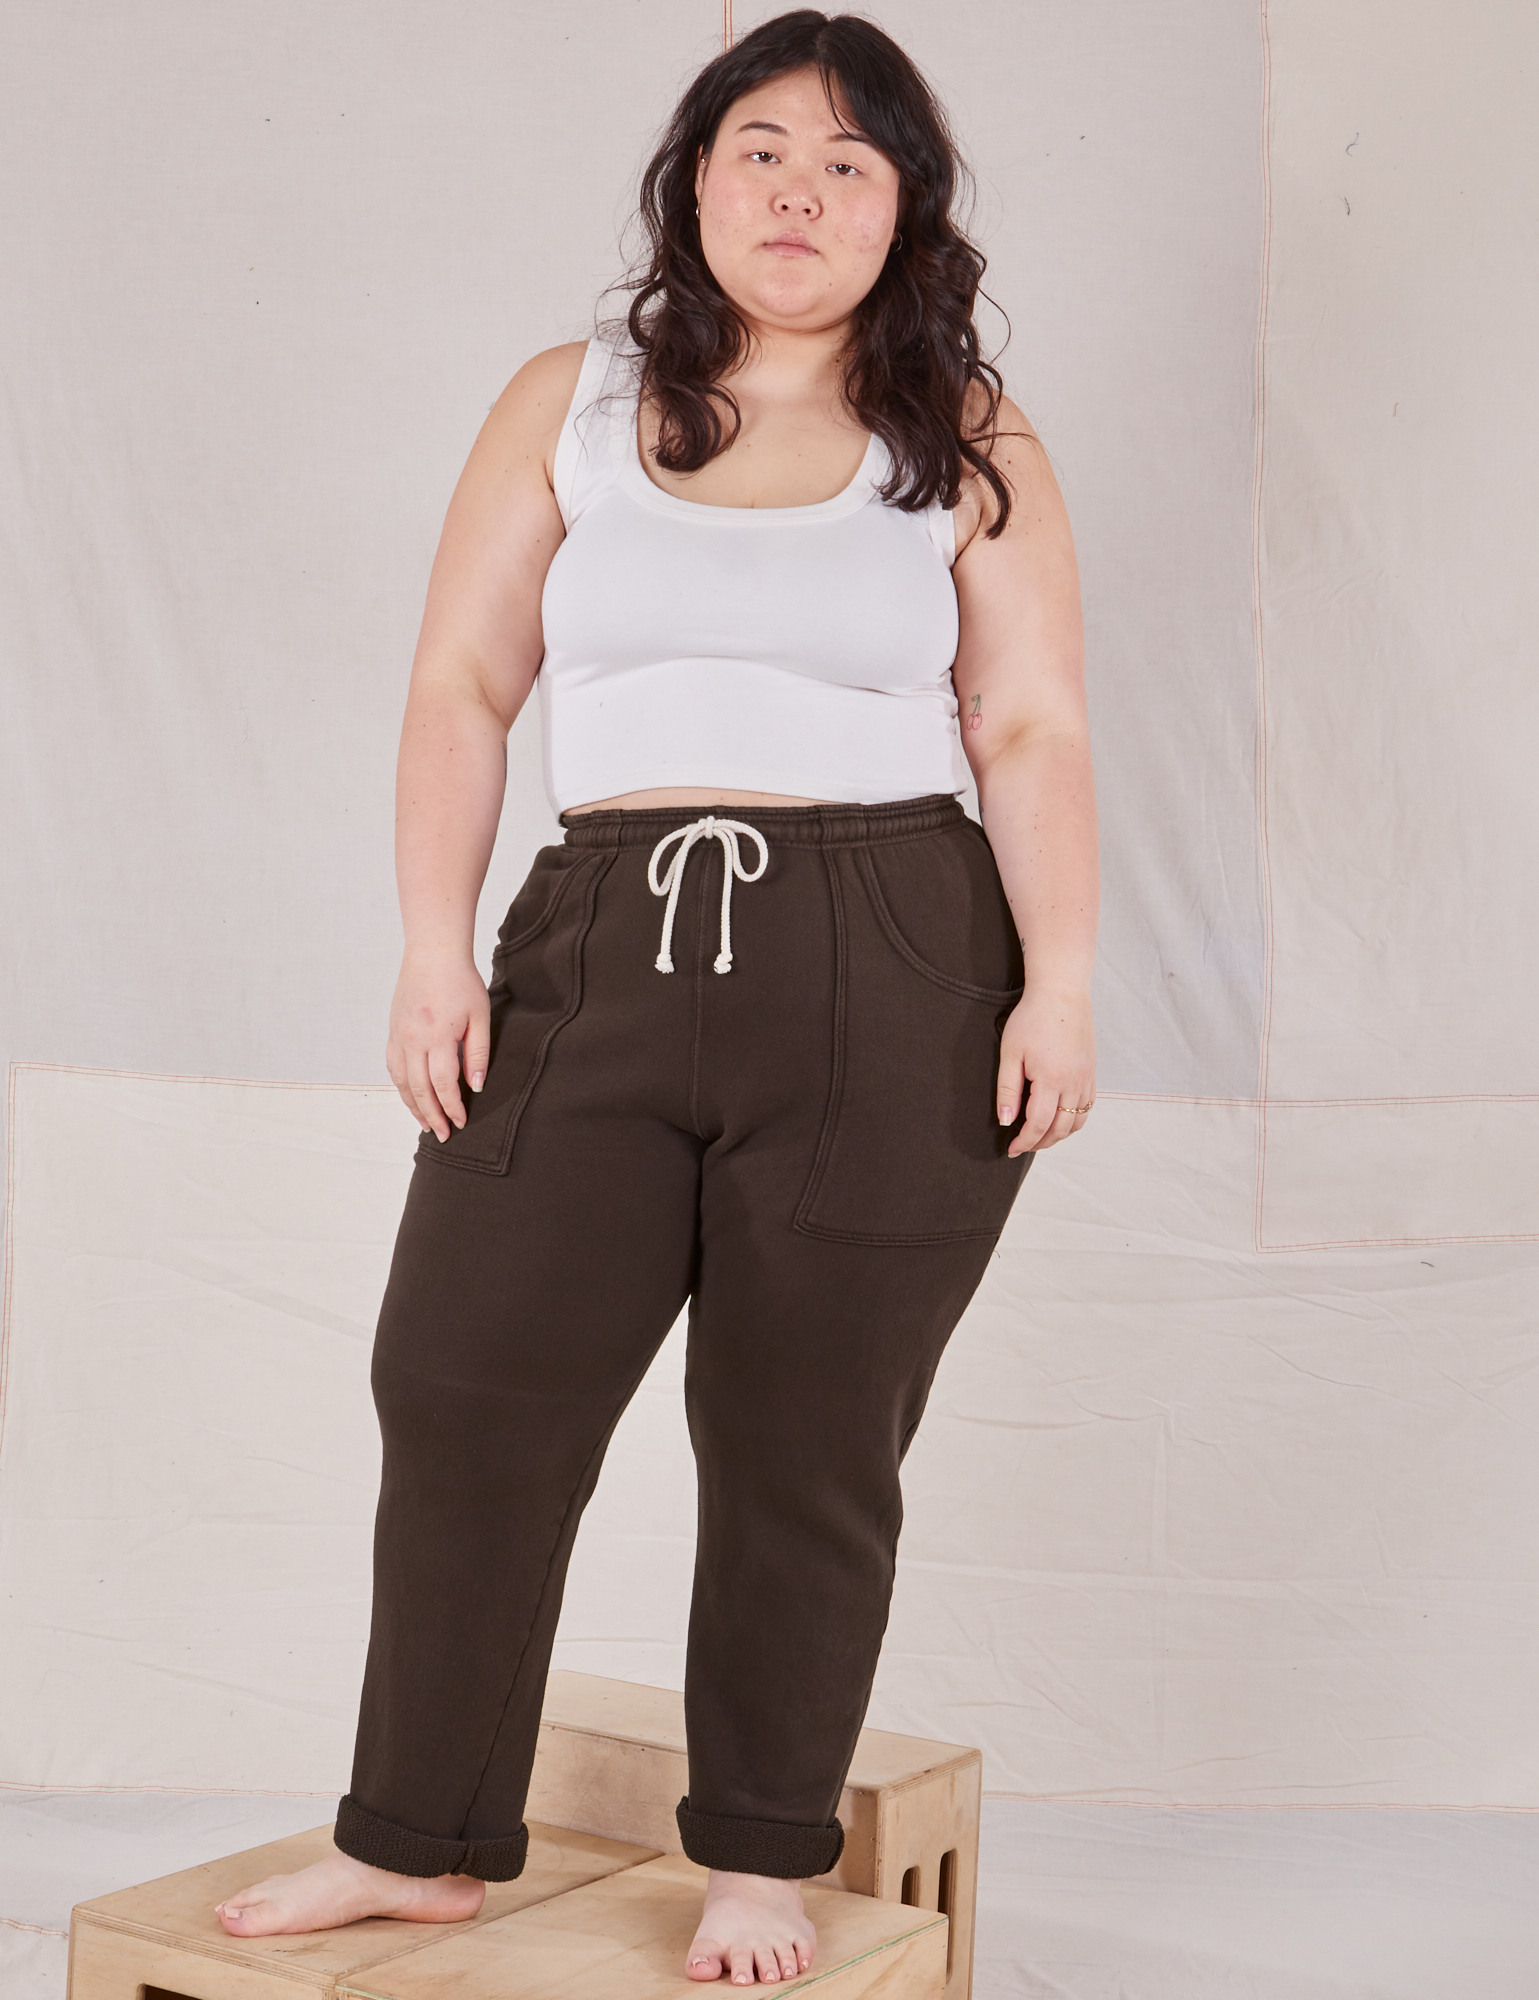 Ashley is 5&#39;7&quot; and wearing L Rolled Cuff Sweat Pants in Espresso Brown paired with vintage off-white Cropped Tank Top